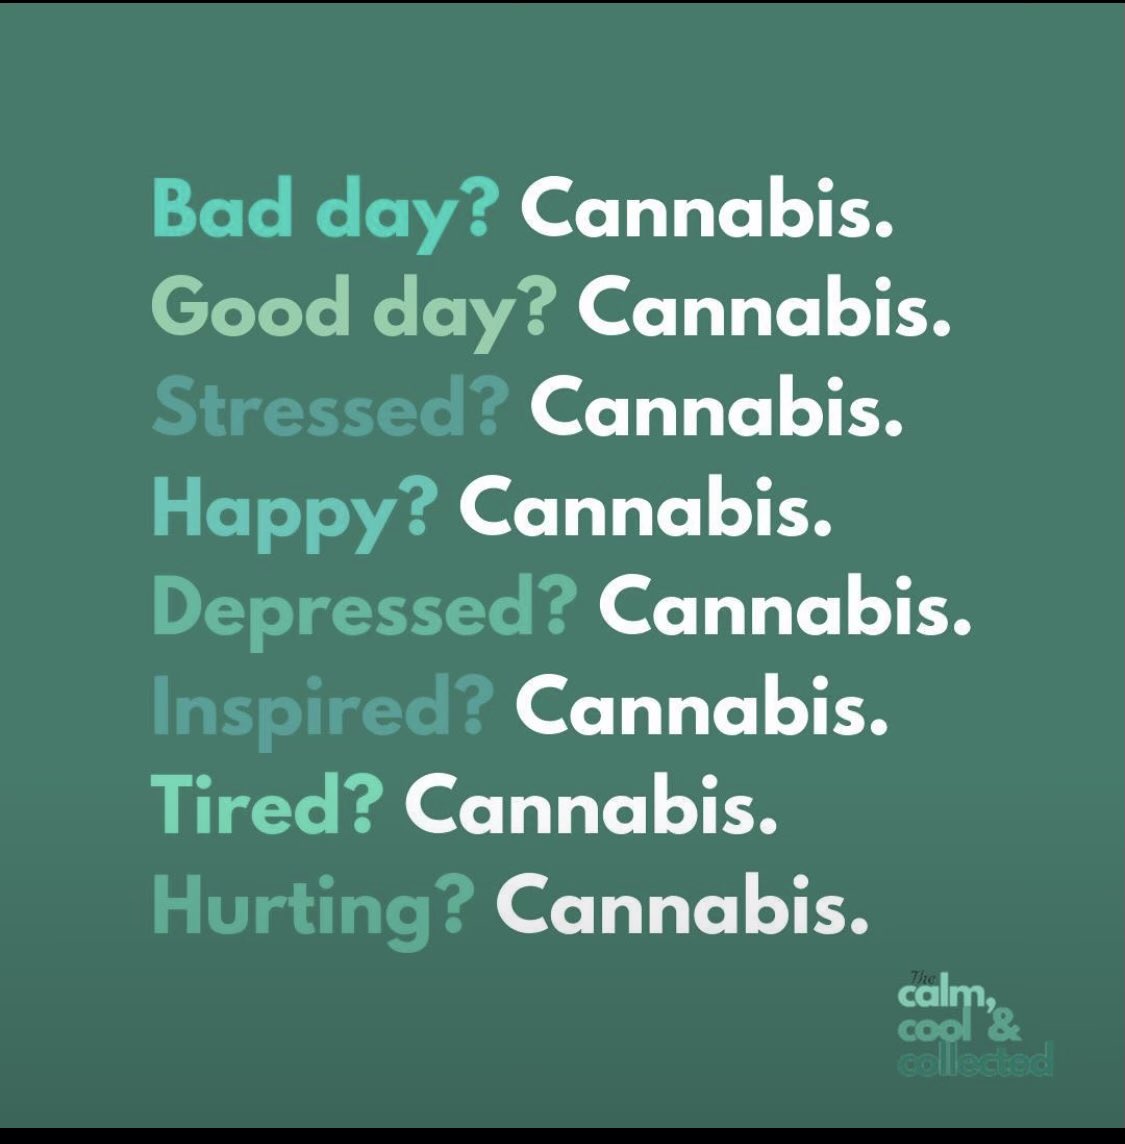 It’s always a good time to enjoy #Cannabis !! #LegalizeIt #CannabisCommunity #Mmemberville